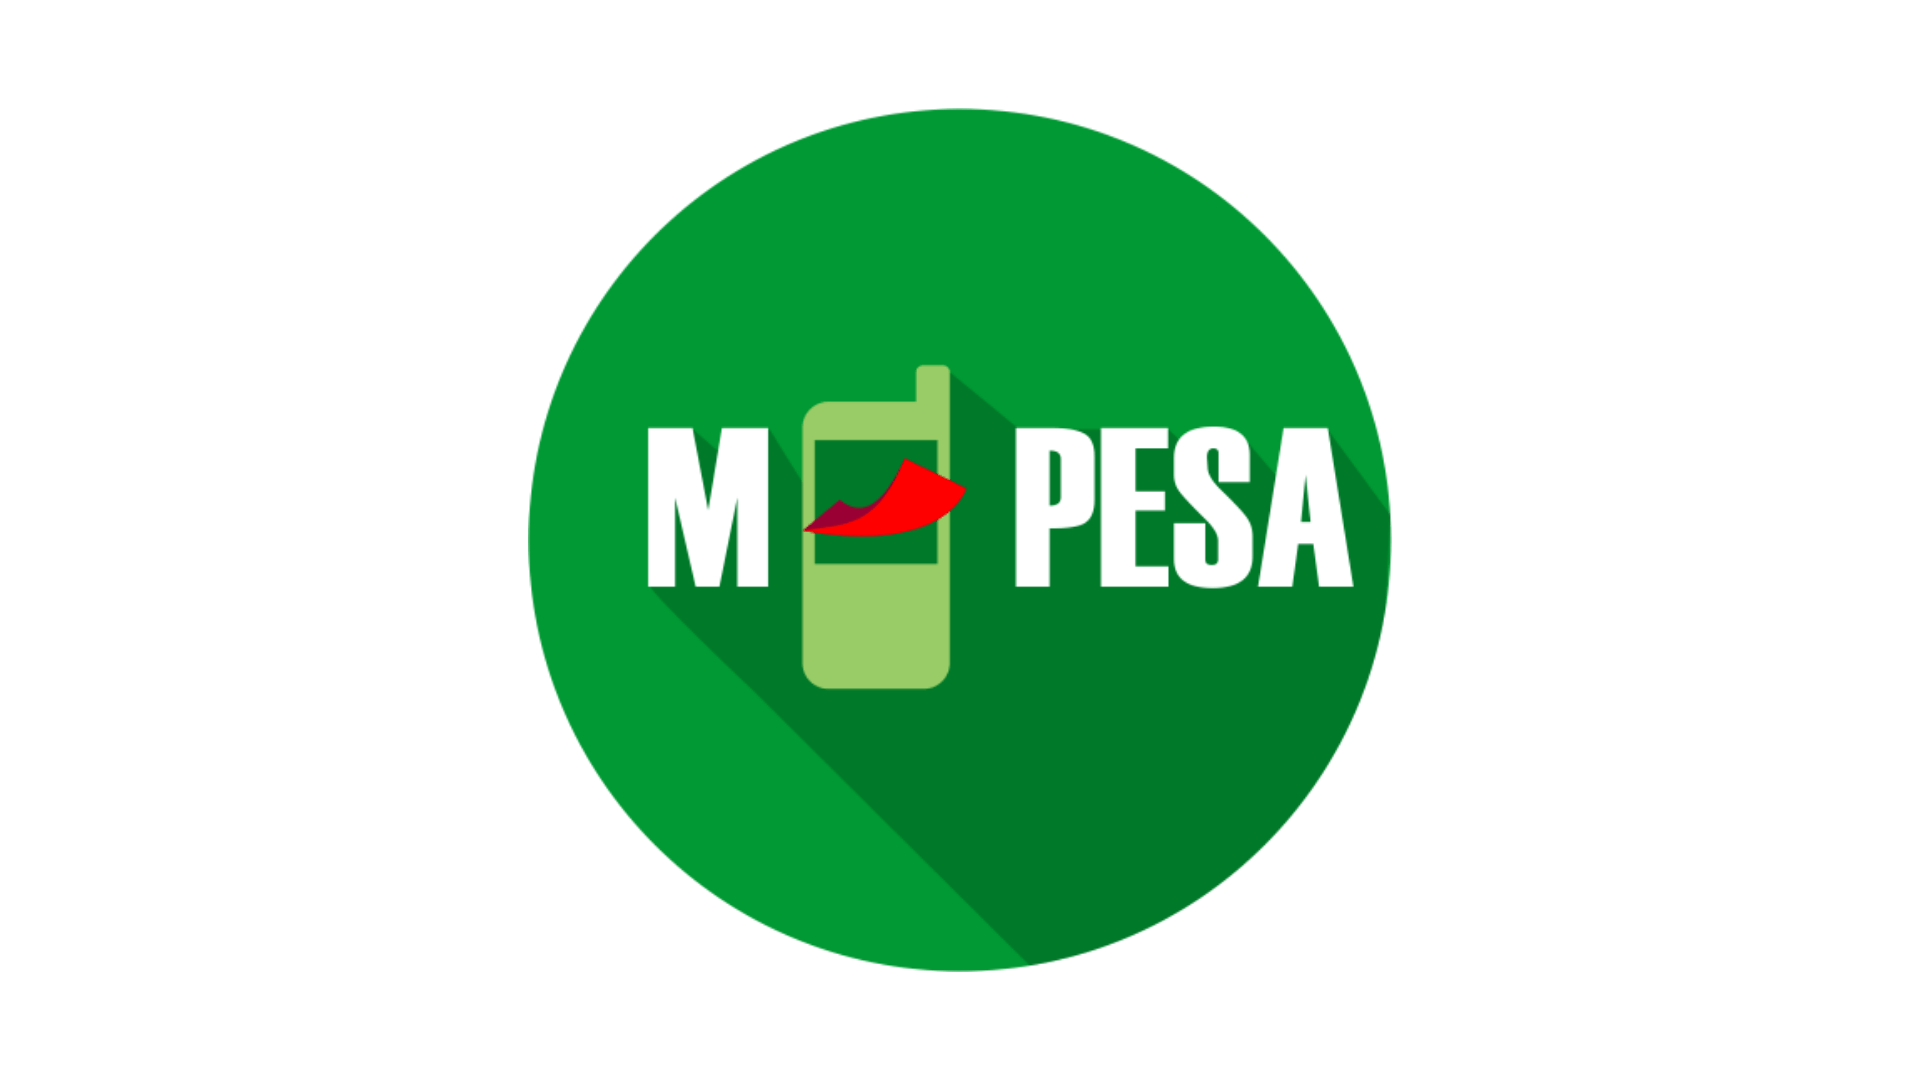 Banks Competing with Mpesa